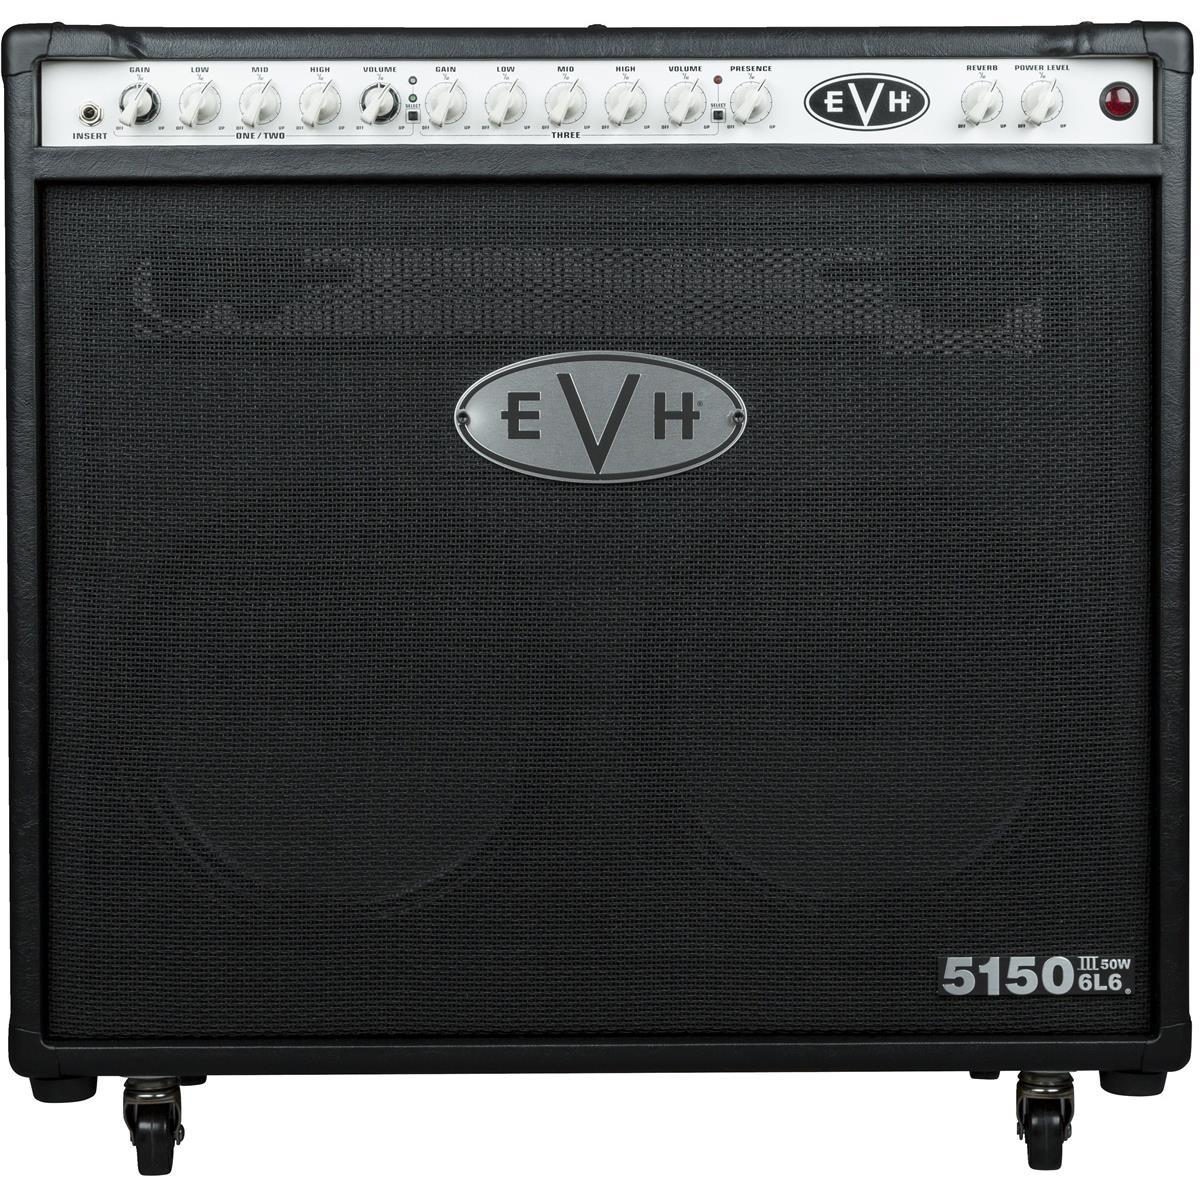 EVH 5150III 50W Amplifier with 6L6 212 Power Tube and 2x 12" Speakers, Black Brimming with brawny tone, the EVH 5150III 50W 6L6 212 Combo is arena-sized sound in a Celestion powered compact package for more convenient transport. Redesigned with versatile, all-new independent dual- concentric controls that allow for gain and volume level matching, this 50-watt tube combo amp boasts three channels for any playing style- crisp cleans, raw crunch or searing leads.  Delivering a full-spectrum of tone, channel one features pristine cleans, channel two kicks in with overdrive and heavy gain similar to the EVH 5150III 100S, while channel three oozes with liquid distortion. Channels one and two each have dual concentric gain/volume controls, with shared EQ (low, mid, high). Channel three has its own gain, volume and EQ (low, mid, high) controls. All three channels also have global presence, resonance and reverb controls. Loaded with dual 12" custom special designed EVH Celestion speakers to enhance and refine both your sound and your style, this combo amp also has seven JJ ECC83 (12AX7) preamp tubes, two JJ 6L6 power tubes and front-panel adjustable power output from 50 watts down to one watt.  Other features include a single input, rear-panel selectable output impedance (4, 8 or 16 ohms) with a pair of parallel speaker outputs, rear-panel MIDI input and preamp output, rear-panel effects loop and headphone jack (mutes power amp) and a four-button footswitch that controls all three channels and reverb for easy onstage switching. The cabinet is constructed out of birch with special internal baffling for tight and increased bass response. Wrapped in stylish Black or Ivory vinyl, the EVH 5150III 50W 6L6 212 Combo is finished off with vintage-style chicken-knobs, red LED jewel indicator, molded black plastic top handle and pop-out casters. A high-quality fitted cover is available as an EVH Accessory.